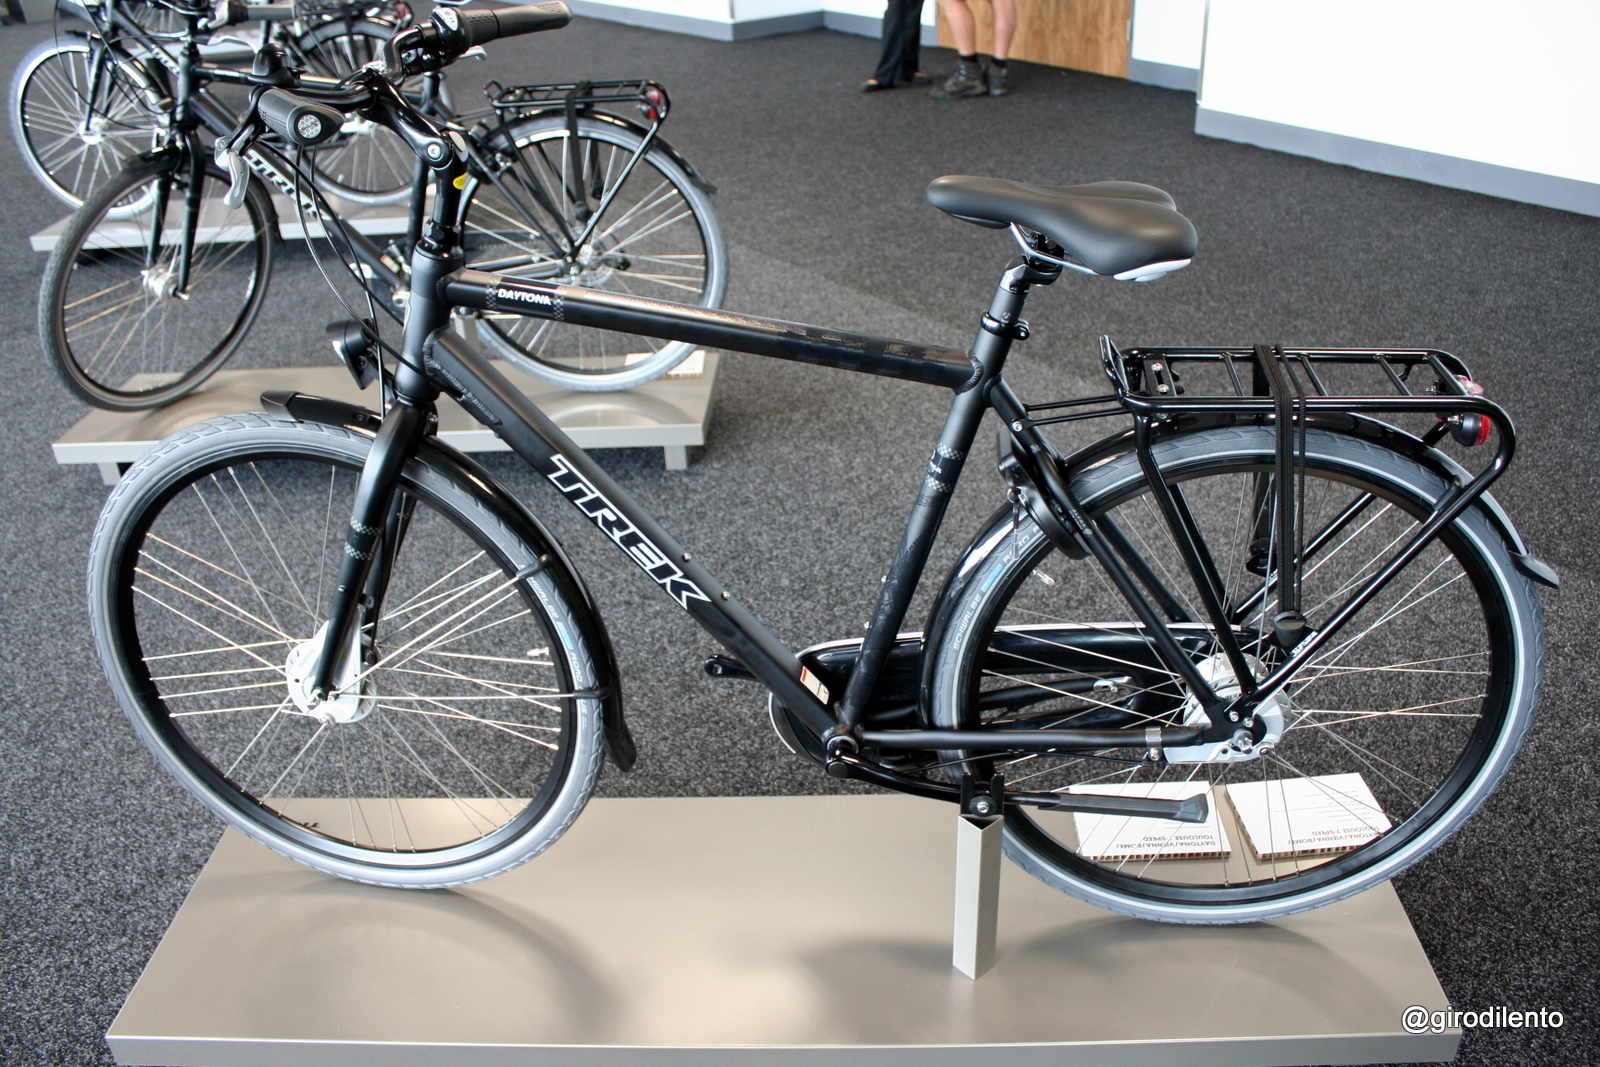 Chainguard, built in lock, rack and stand - come on Trek - sell me one of these please!